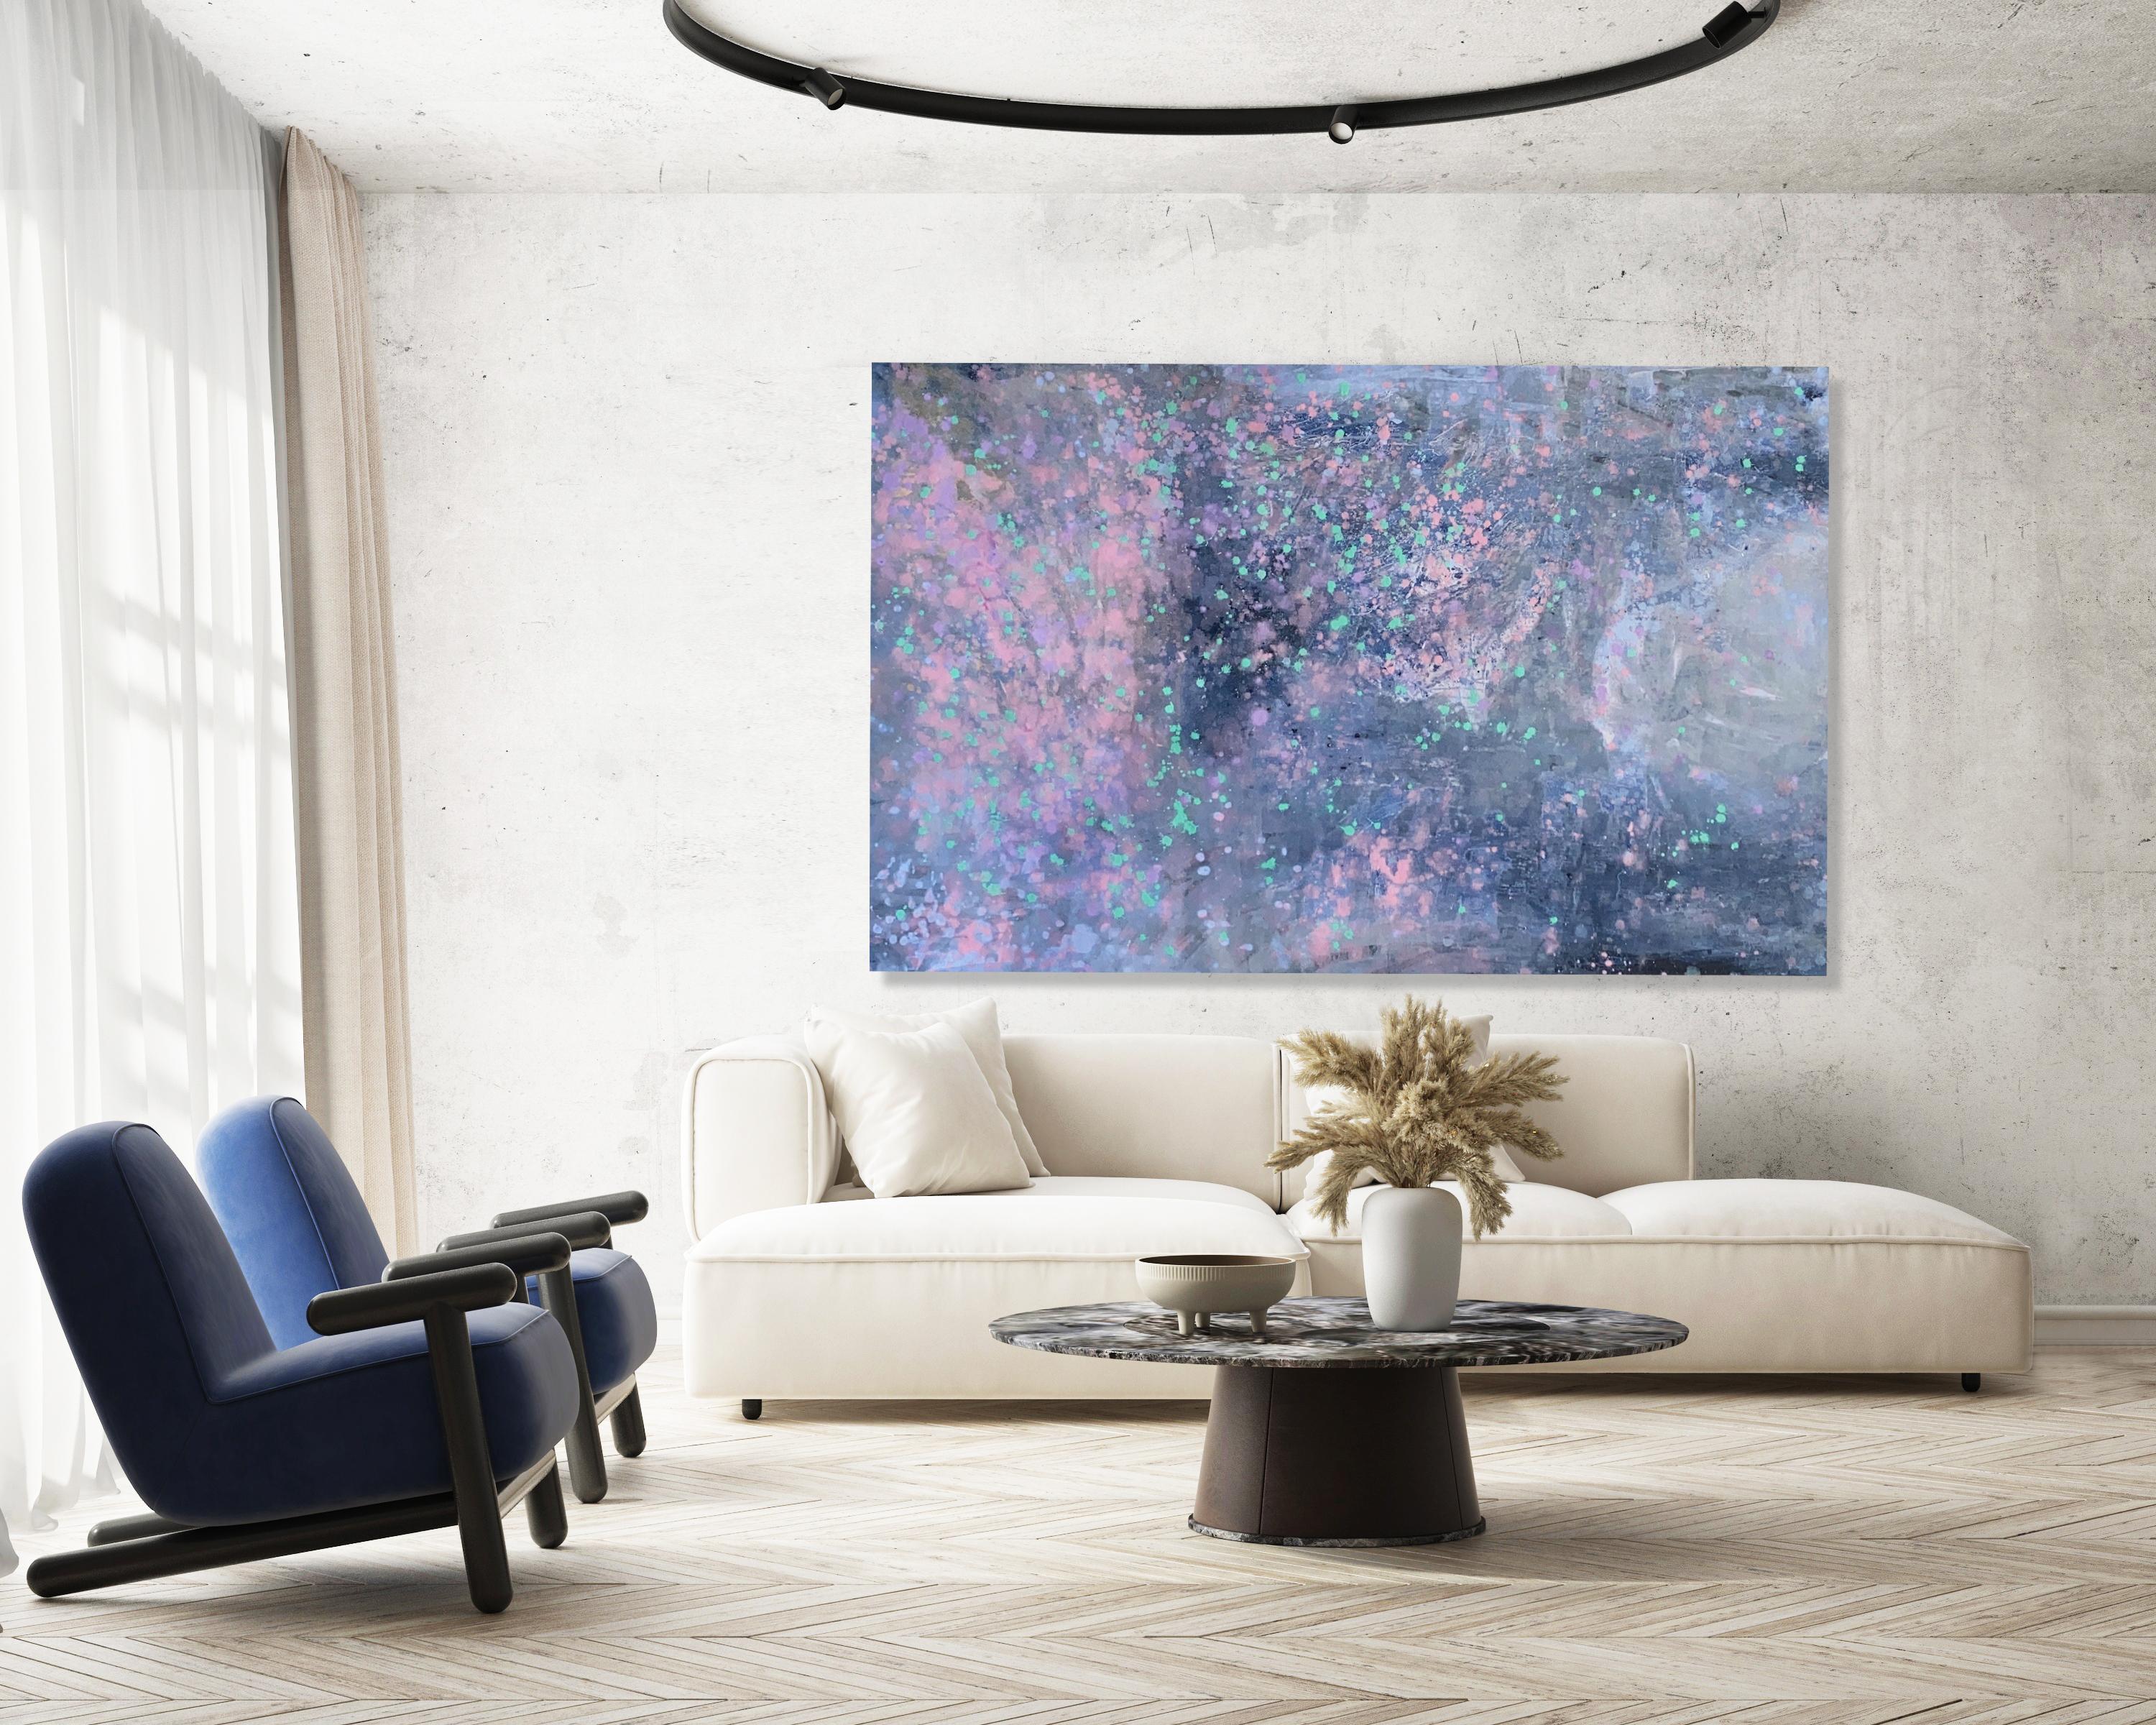 Milky Way large statement art abstract painting on canvas blue grey pink aqua - Art by Kathleen Rhee